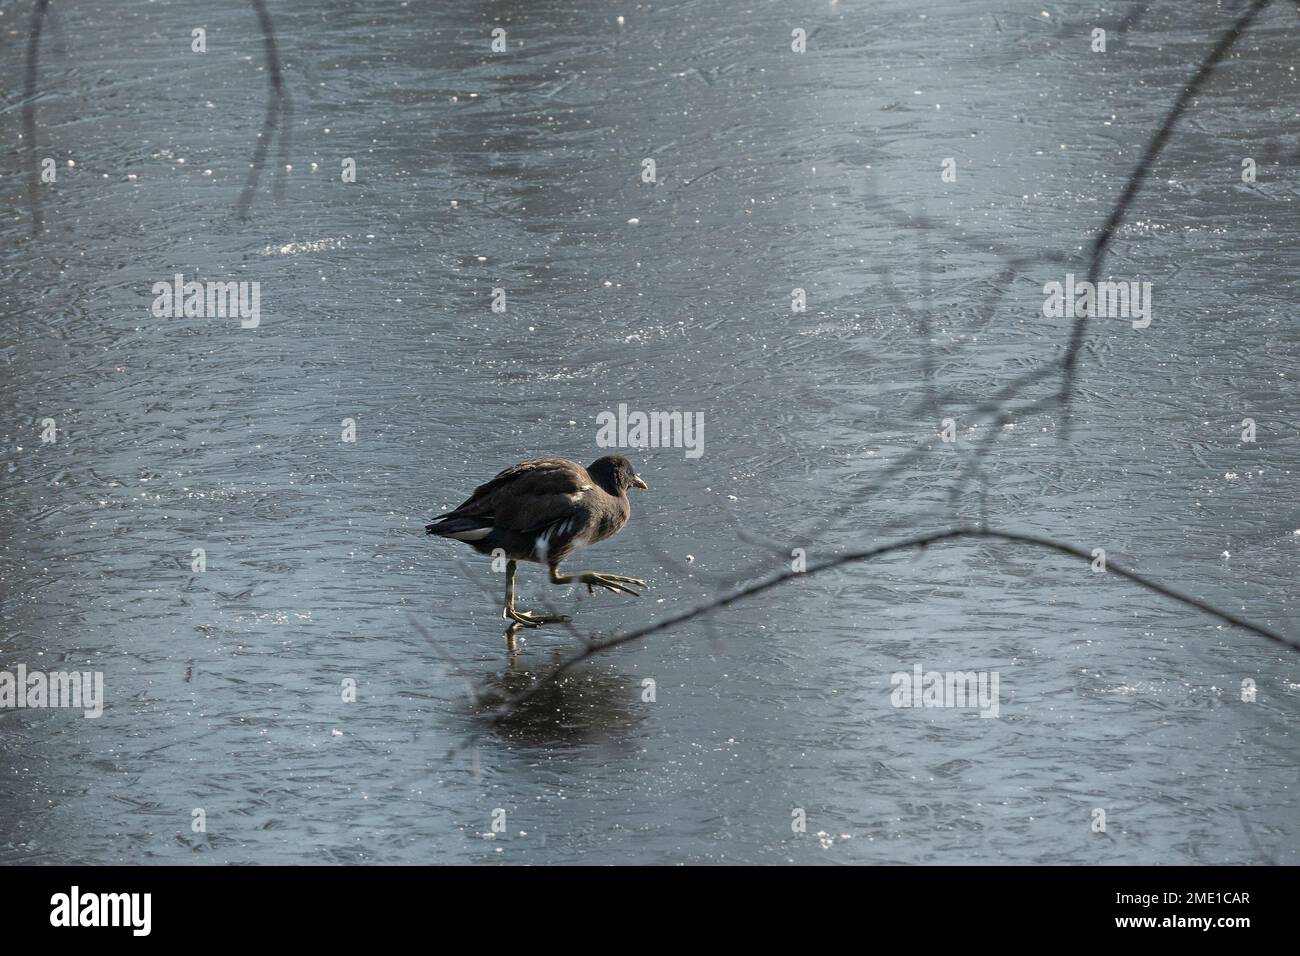 Frozen freshwater lake as Reading plunges to minus C 10 overnight. Coot bird carefully treads on iced lake as it learns how to walk on an icy surface Stock Photo